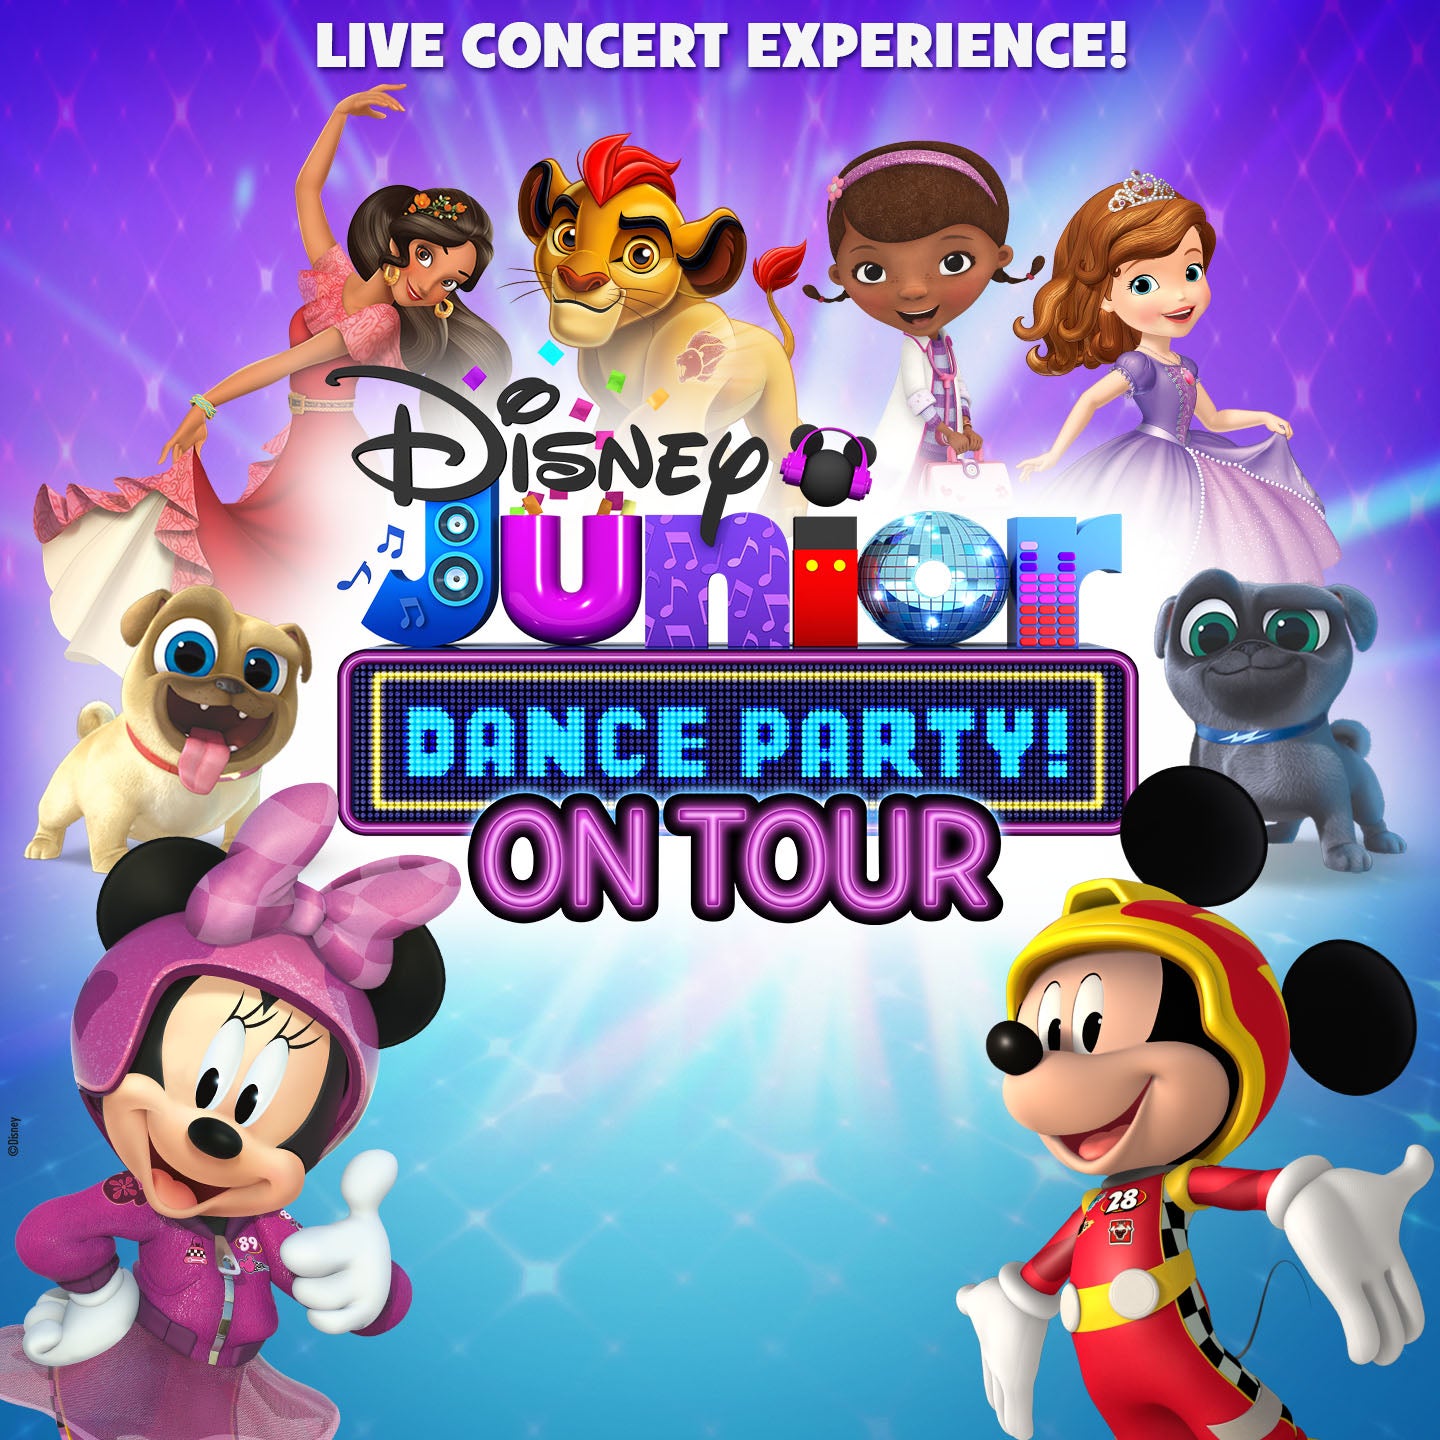 New 'Disney Junior Dance Party!' Live Show Coming This Fall to